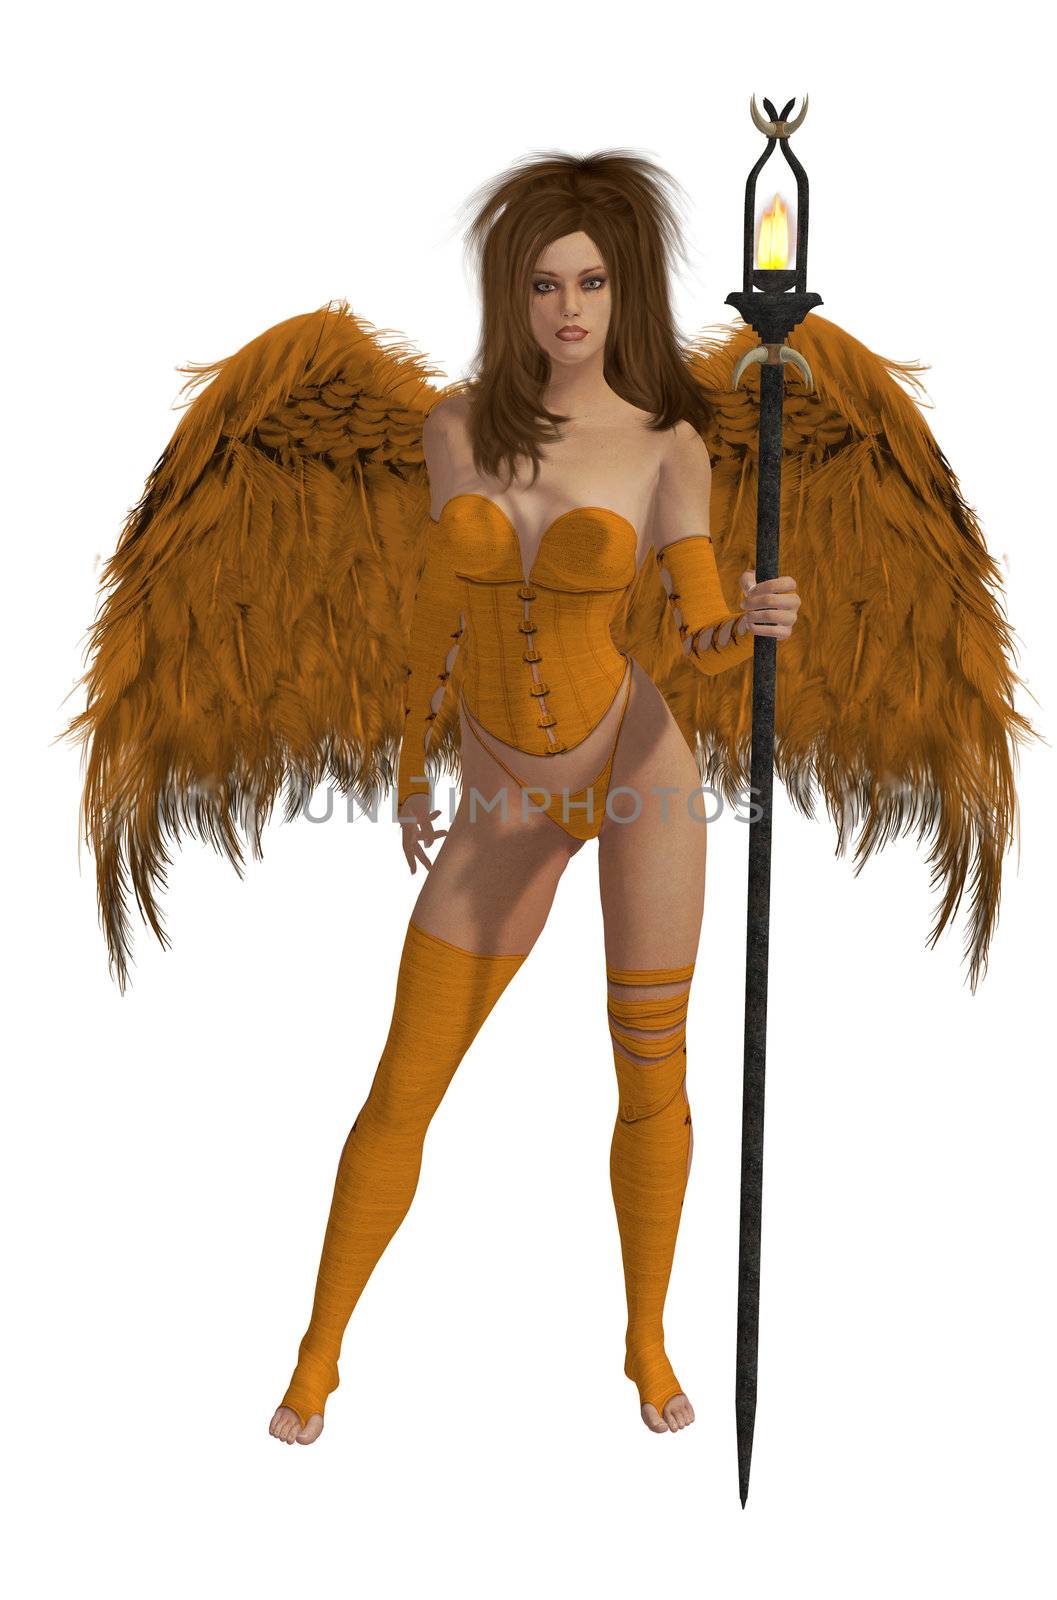 Orange Winged Angel With Brunette Hair by kathygold